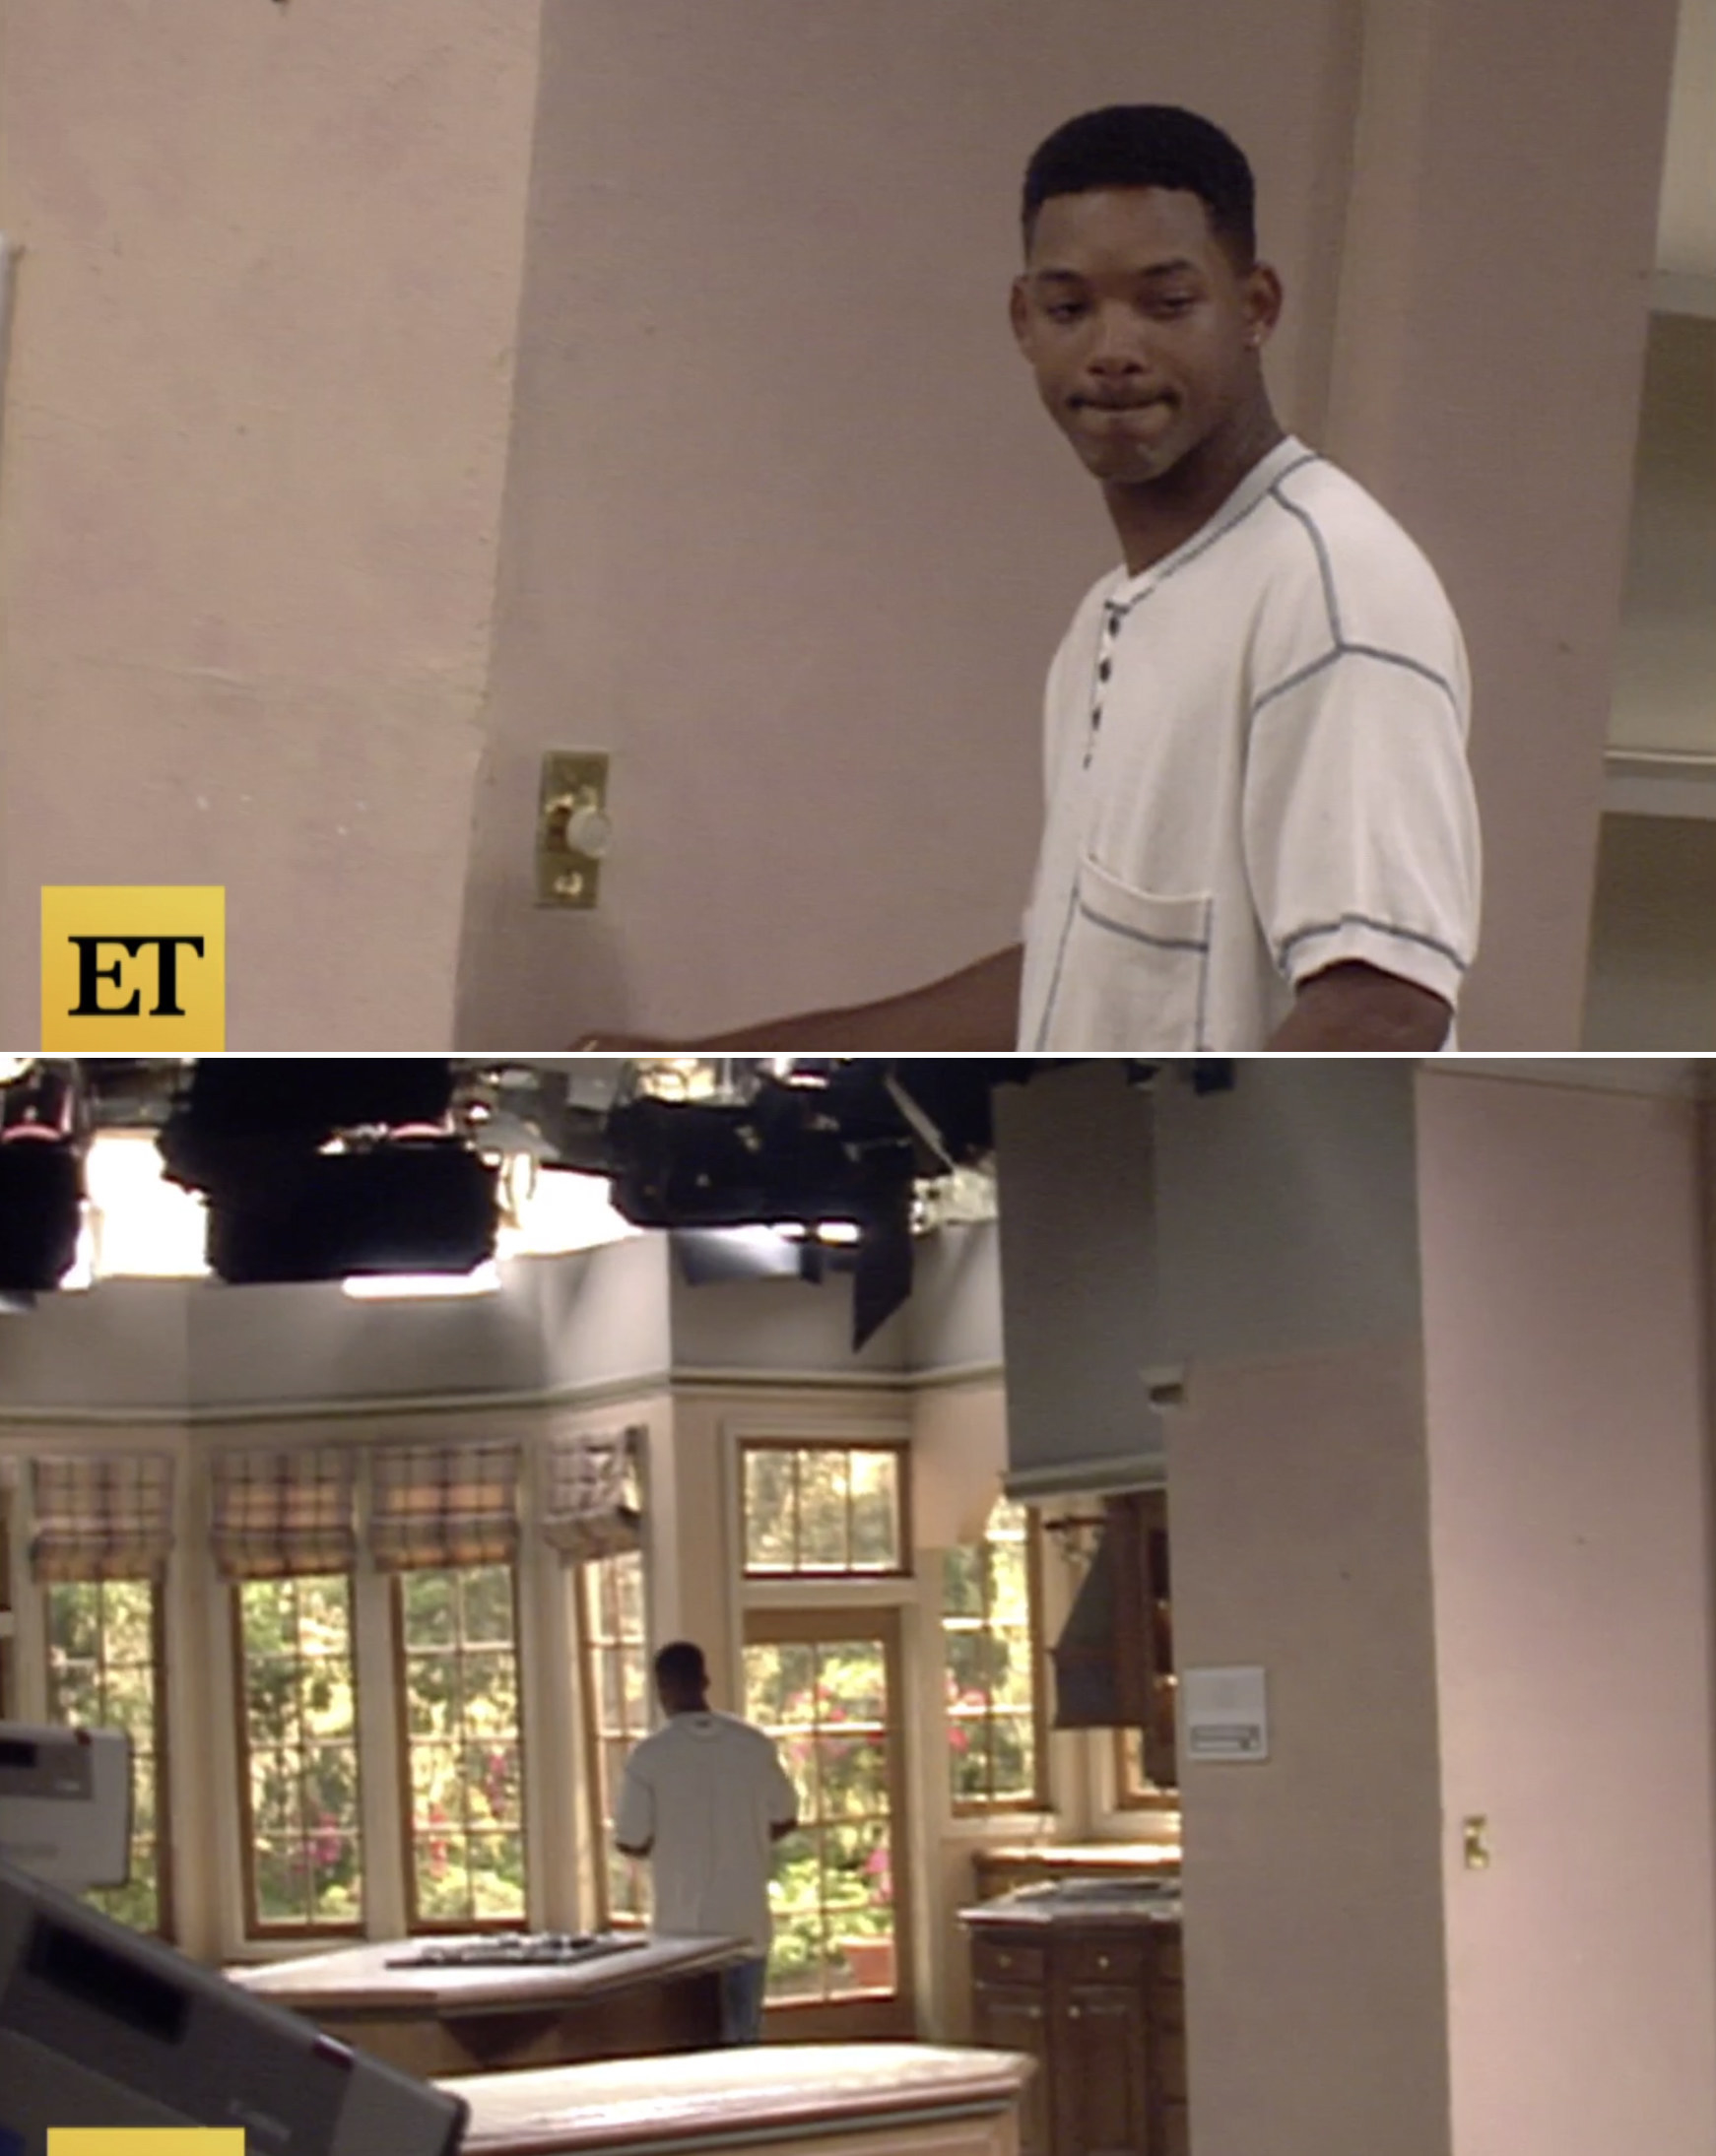 Will Smith filming the series finale of The Fresh Prince of Bel-Air and the moment when Will shuts off the lights in the living room